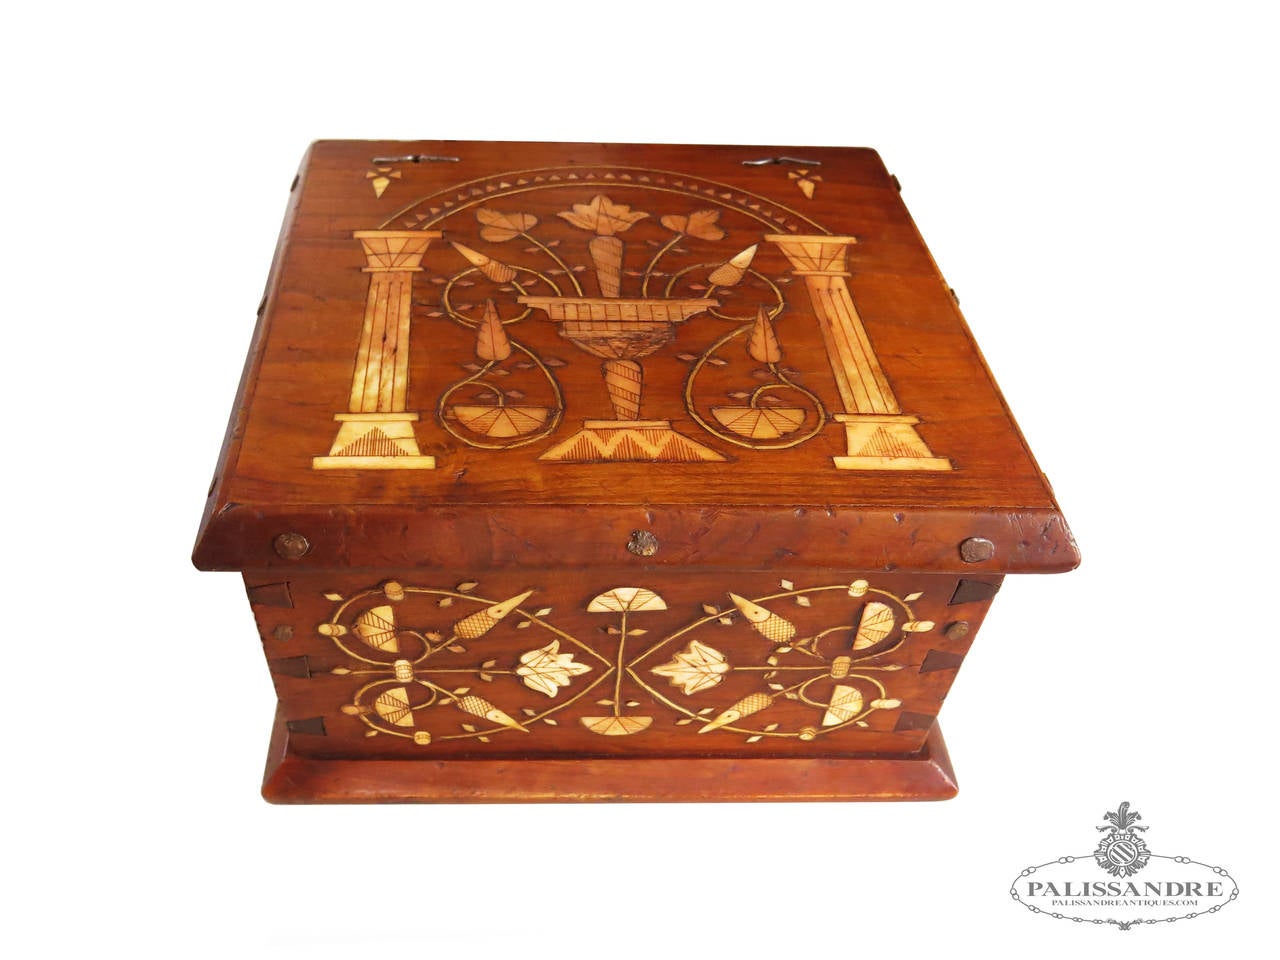 Beautiful box made with care in the technique of pinyonet inlaid with fine wood slats lemongrass and blood sausages engraved on solid walnut. At the top there represented a vase with stylized flowers and lanceolate leaves inside an arcade with